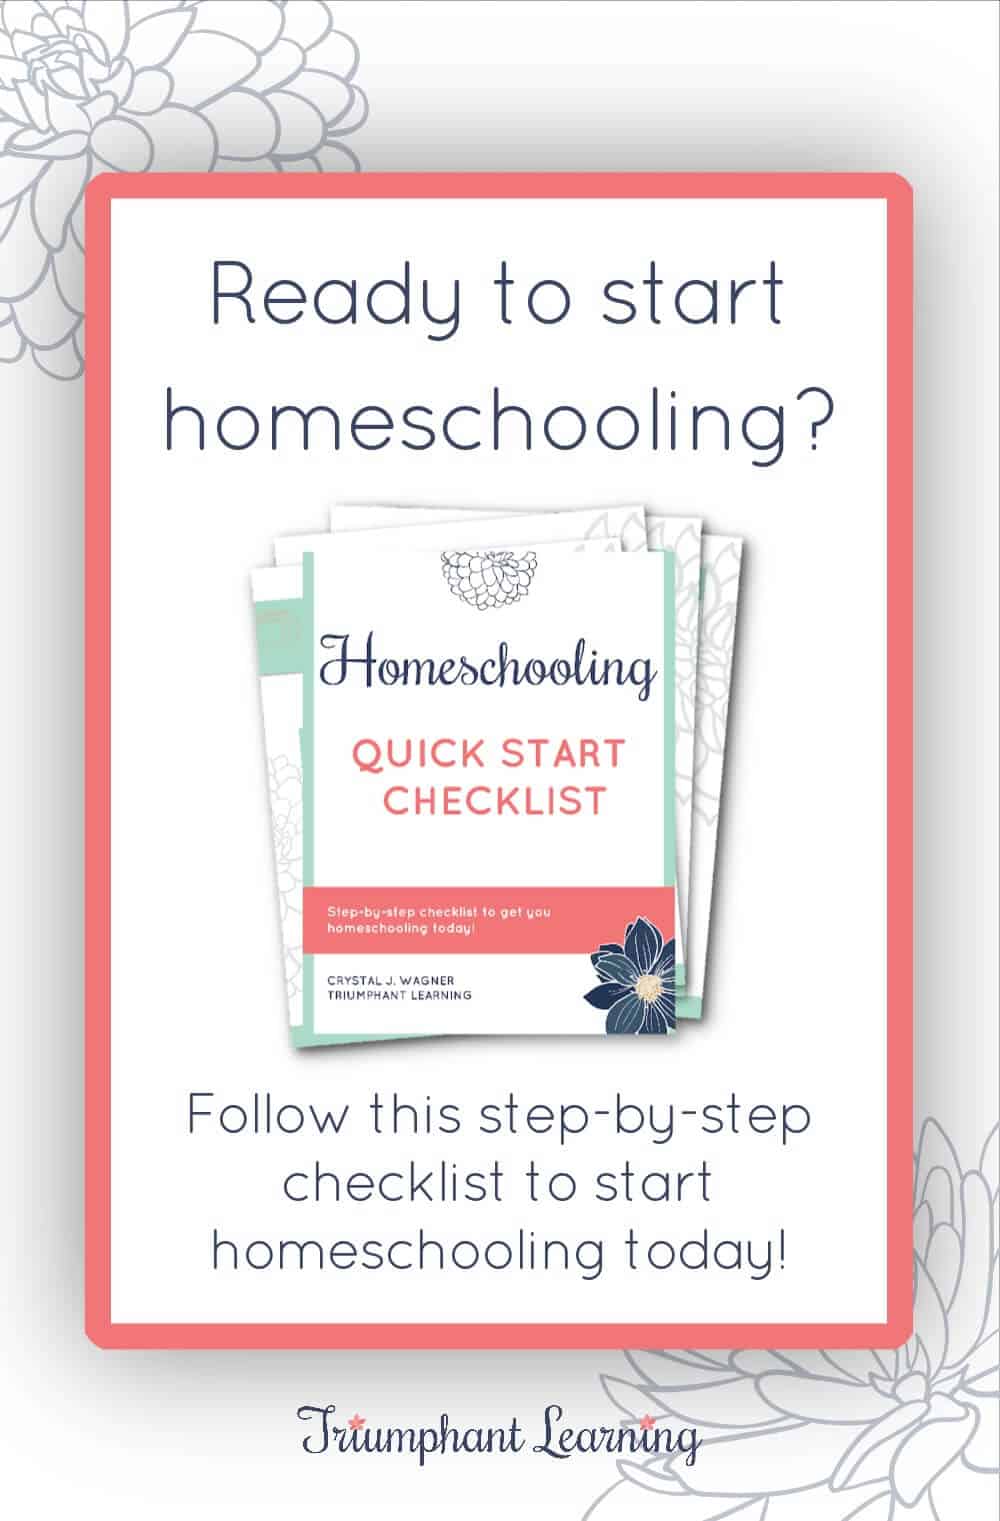 Follow this step-by-step checklist to start homeschooling today! via @TriLearning